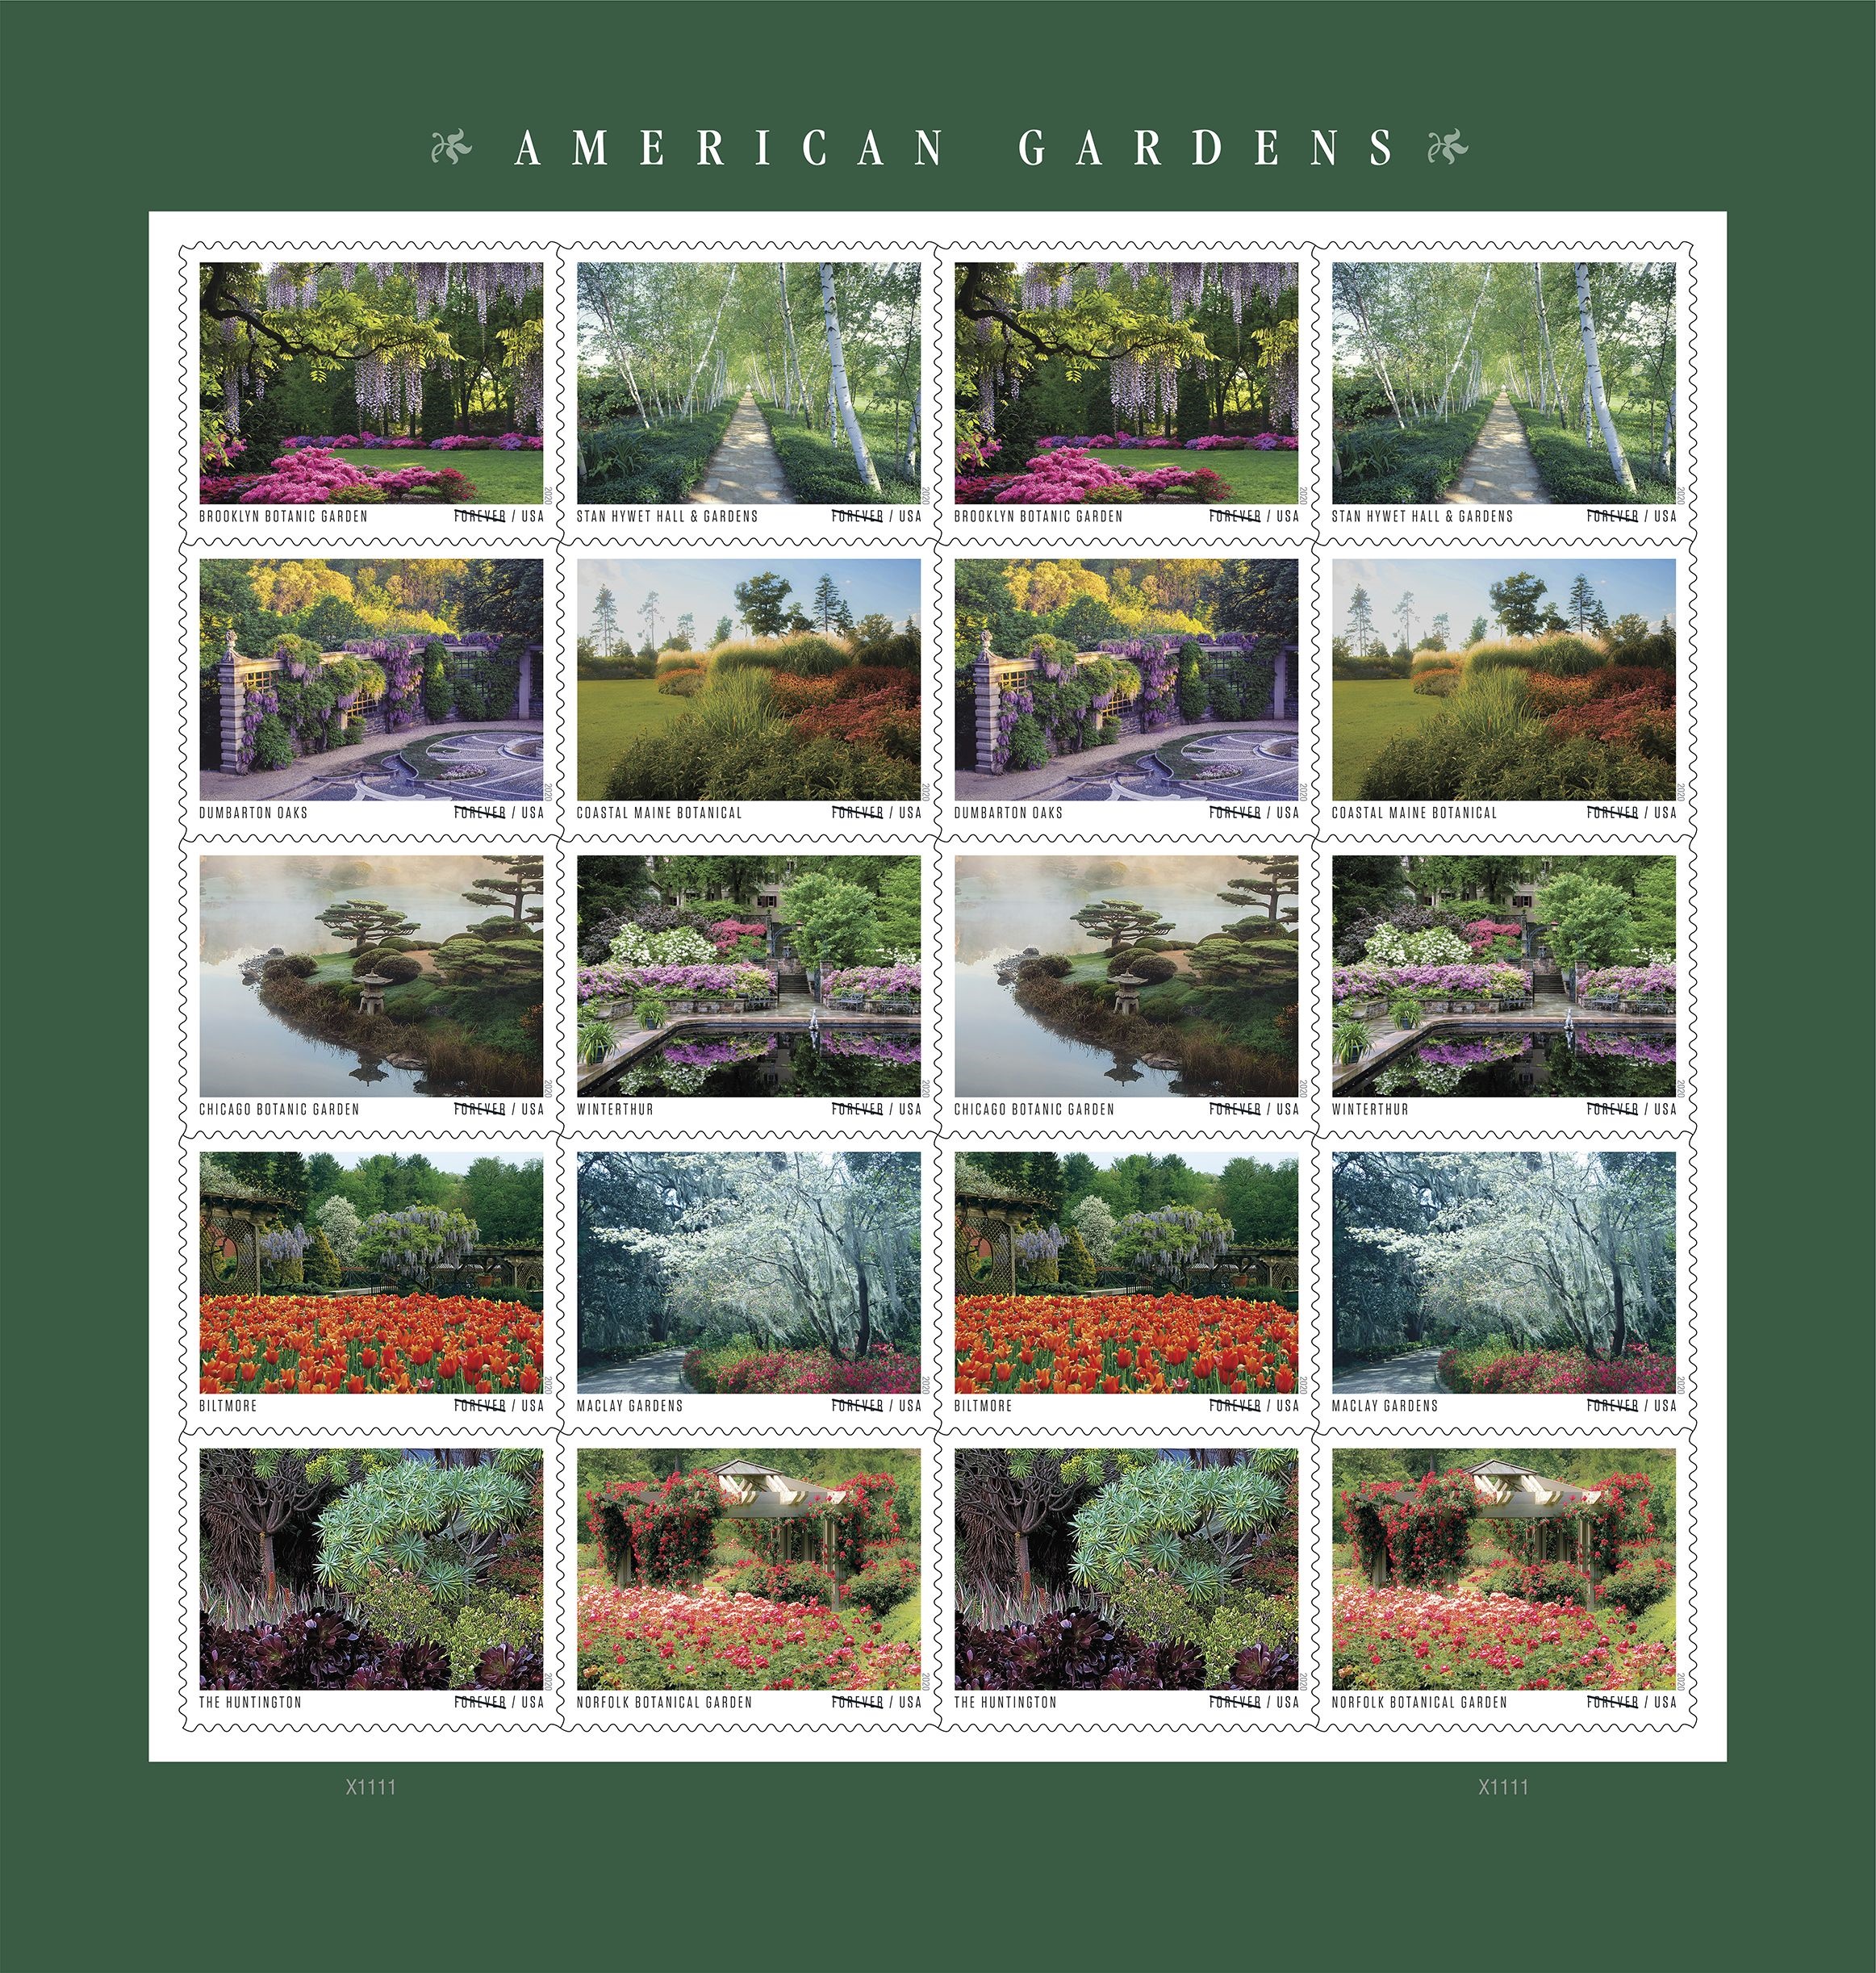 5664-65 - 2022 5c Butterfly Garden Flowers, Nonprofit - Mystic Stamp Company